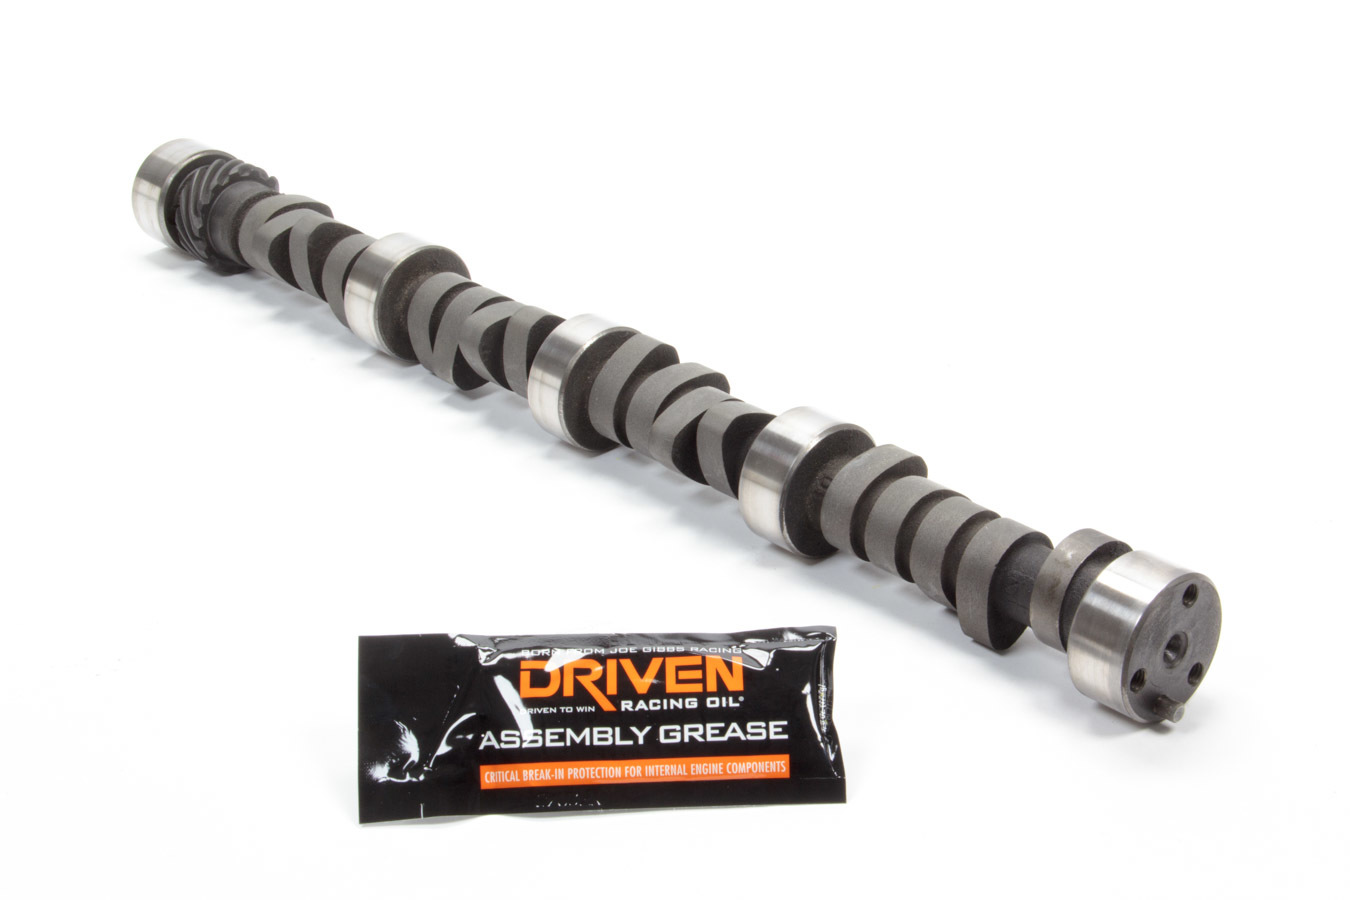 Howards Cams 112711-06 Camshaft, Oval Track Lift Rule, Hydraulic Flat Tappet, Lift 0.390 / 0.410 in, Duration 288 / 294, 106 LSA, 3500 / 6400 RPM, Small Block Chevy, Each